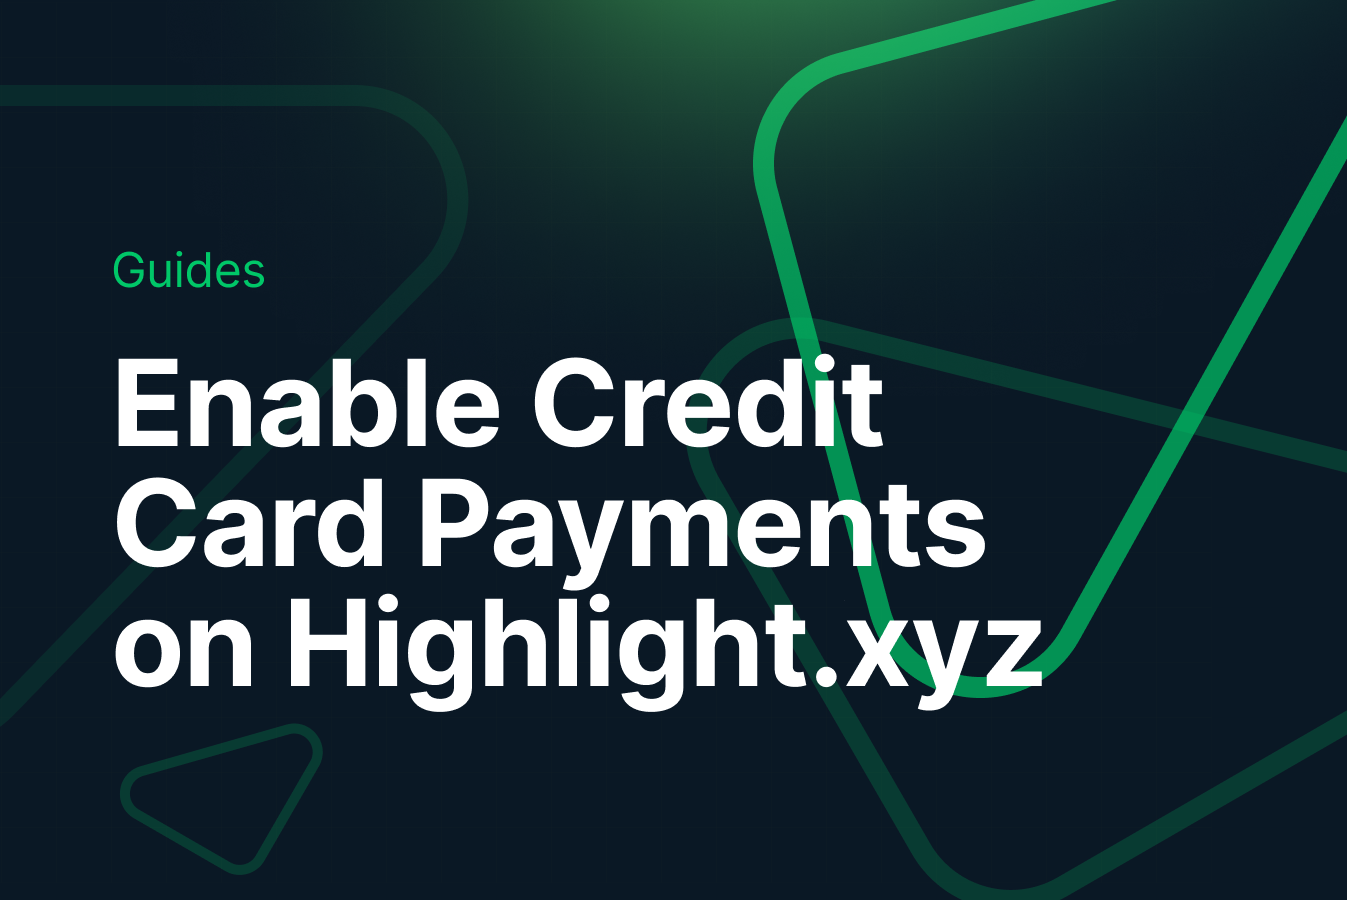 How to Enable Credit Card Payments on a Highlight Contract using Crossmint